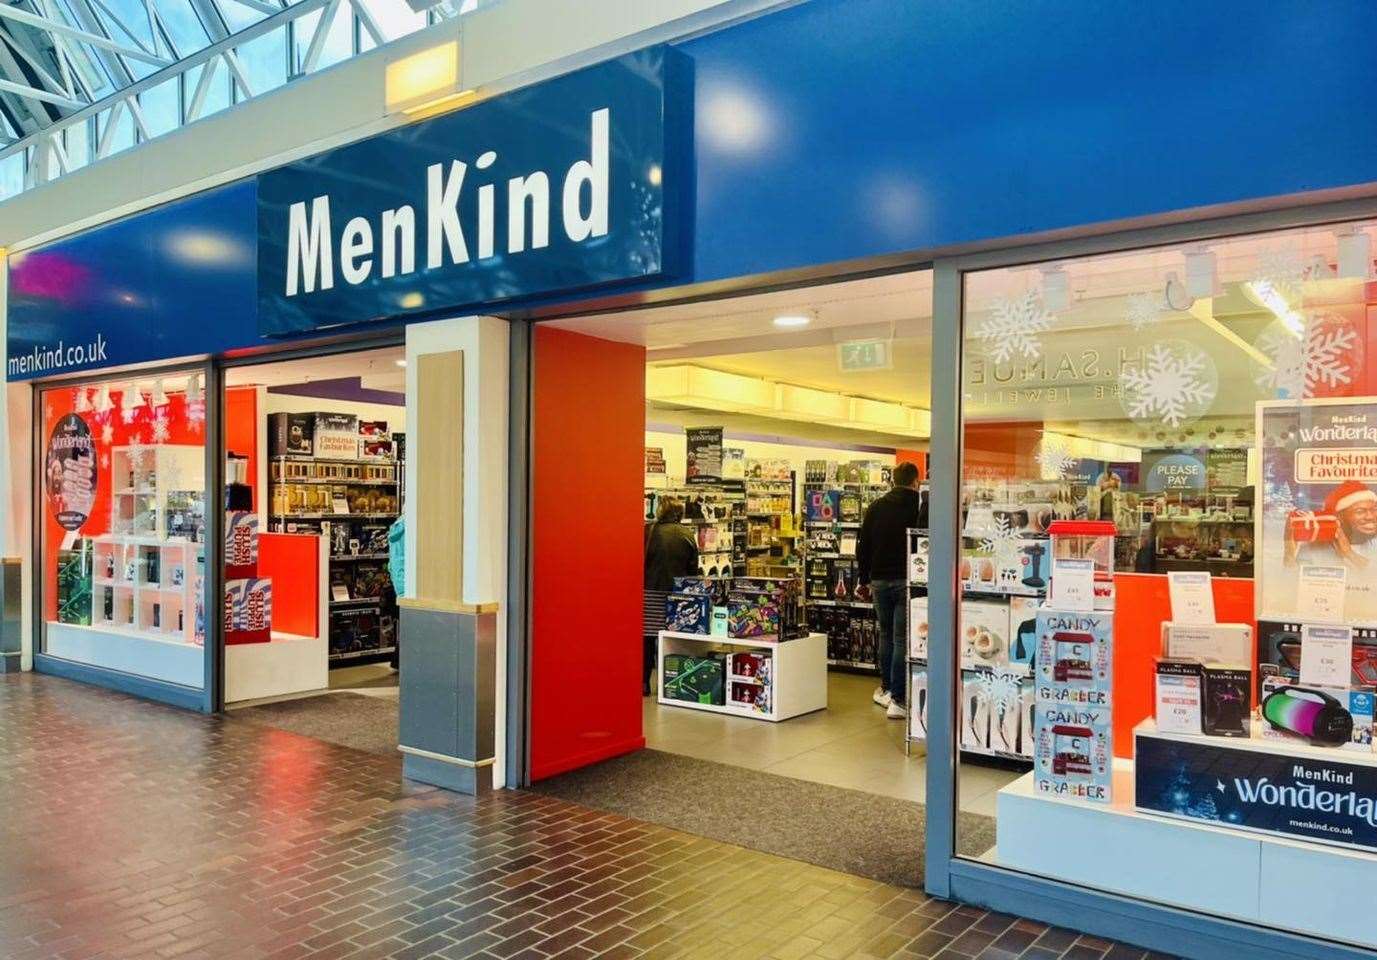 MenKind has replaced the former Clarks in Hempstead valley shopping centre